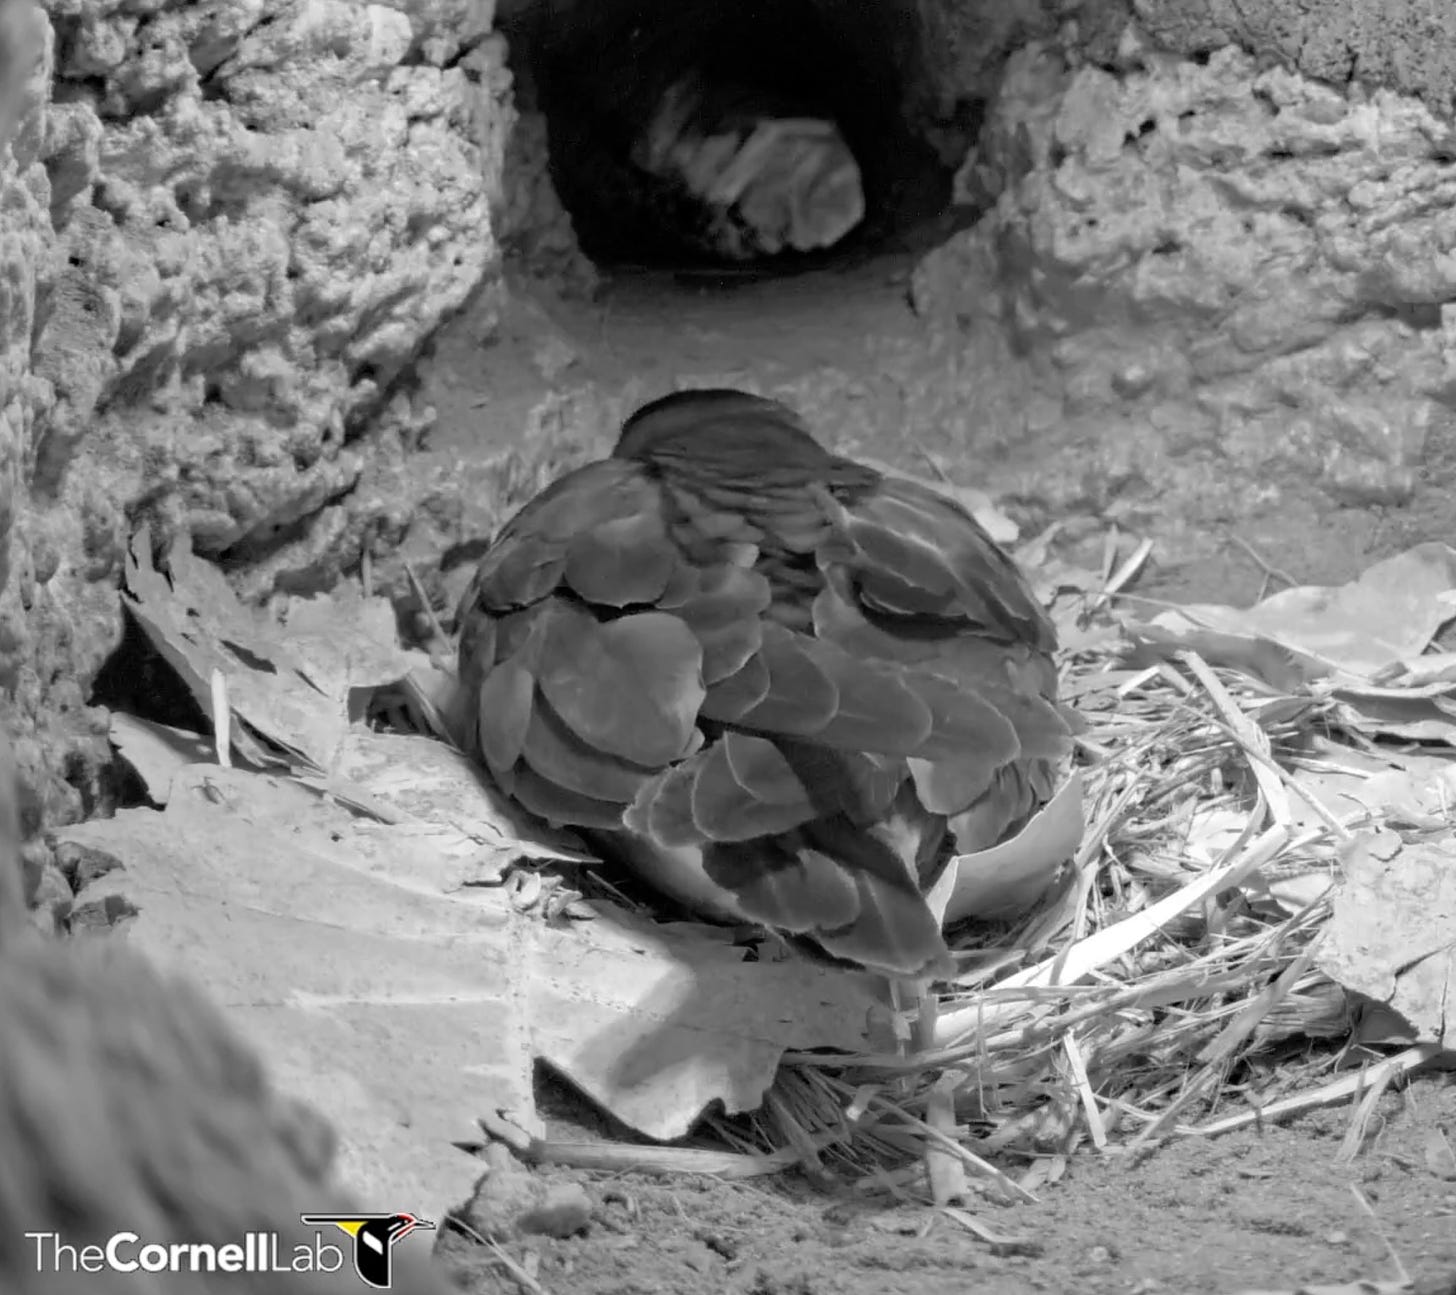 Literally just a Bermuda petrel sitting on some vegetation in a burrow, in black and white. You can't even see its head.